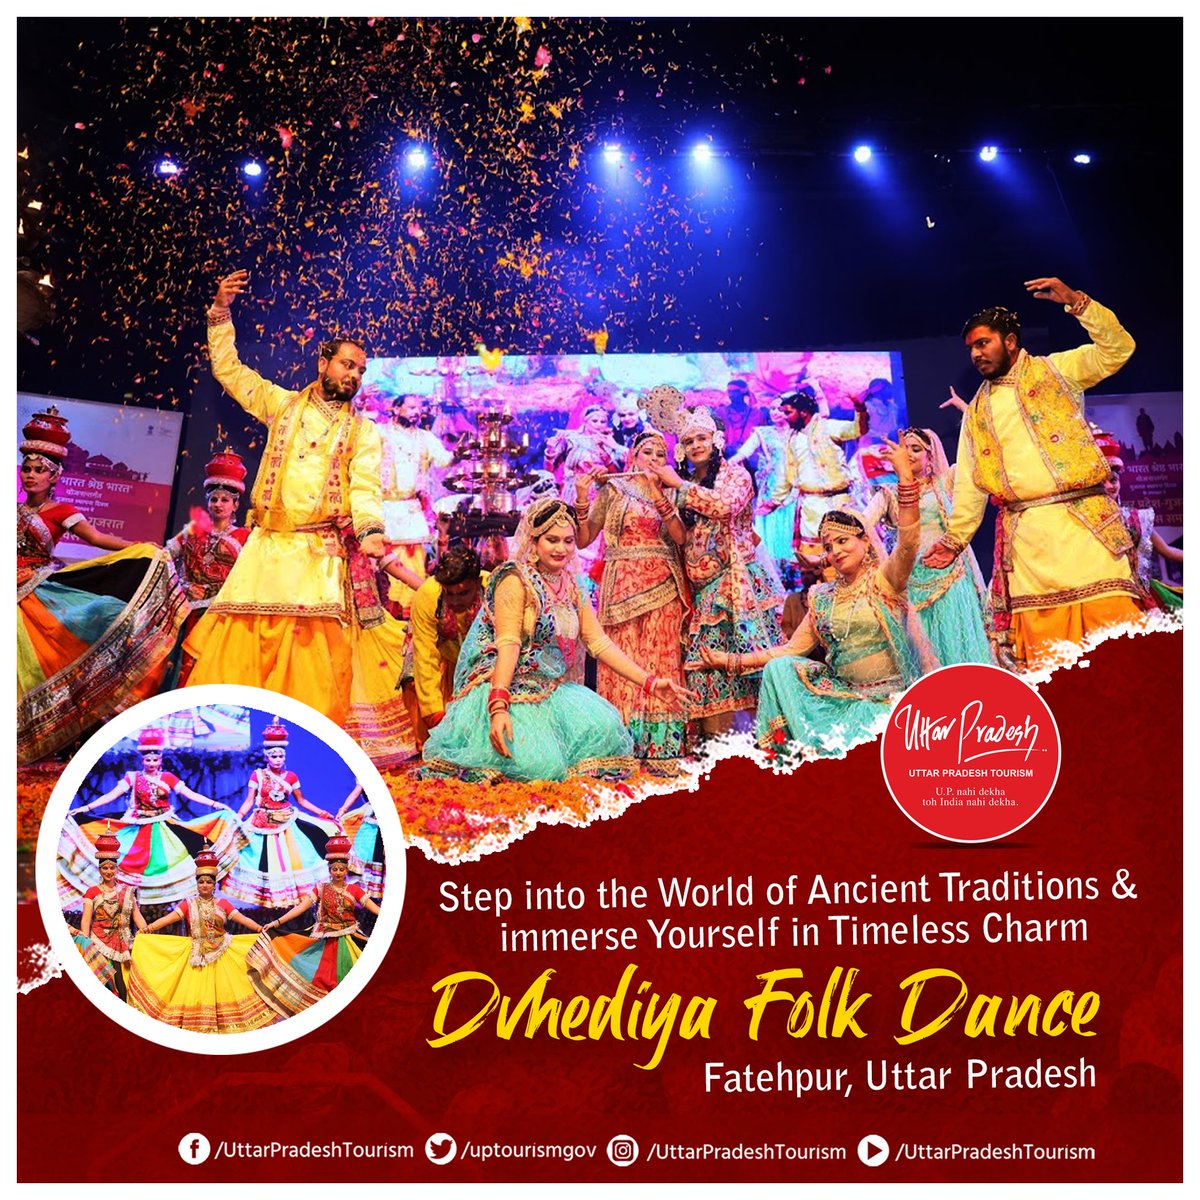 Experience the cultural richness of #Fatehpur through #DhedhiyaDance!
This traditional dance holds special significance as it commemorates the welcoming of #LordRama upon his victorious return from #Lanka.